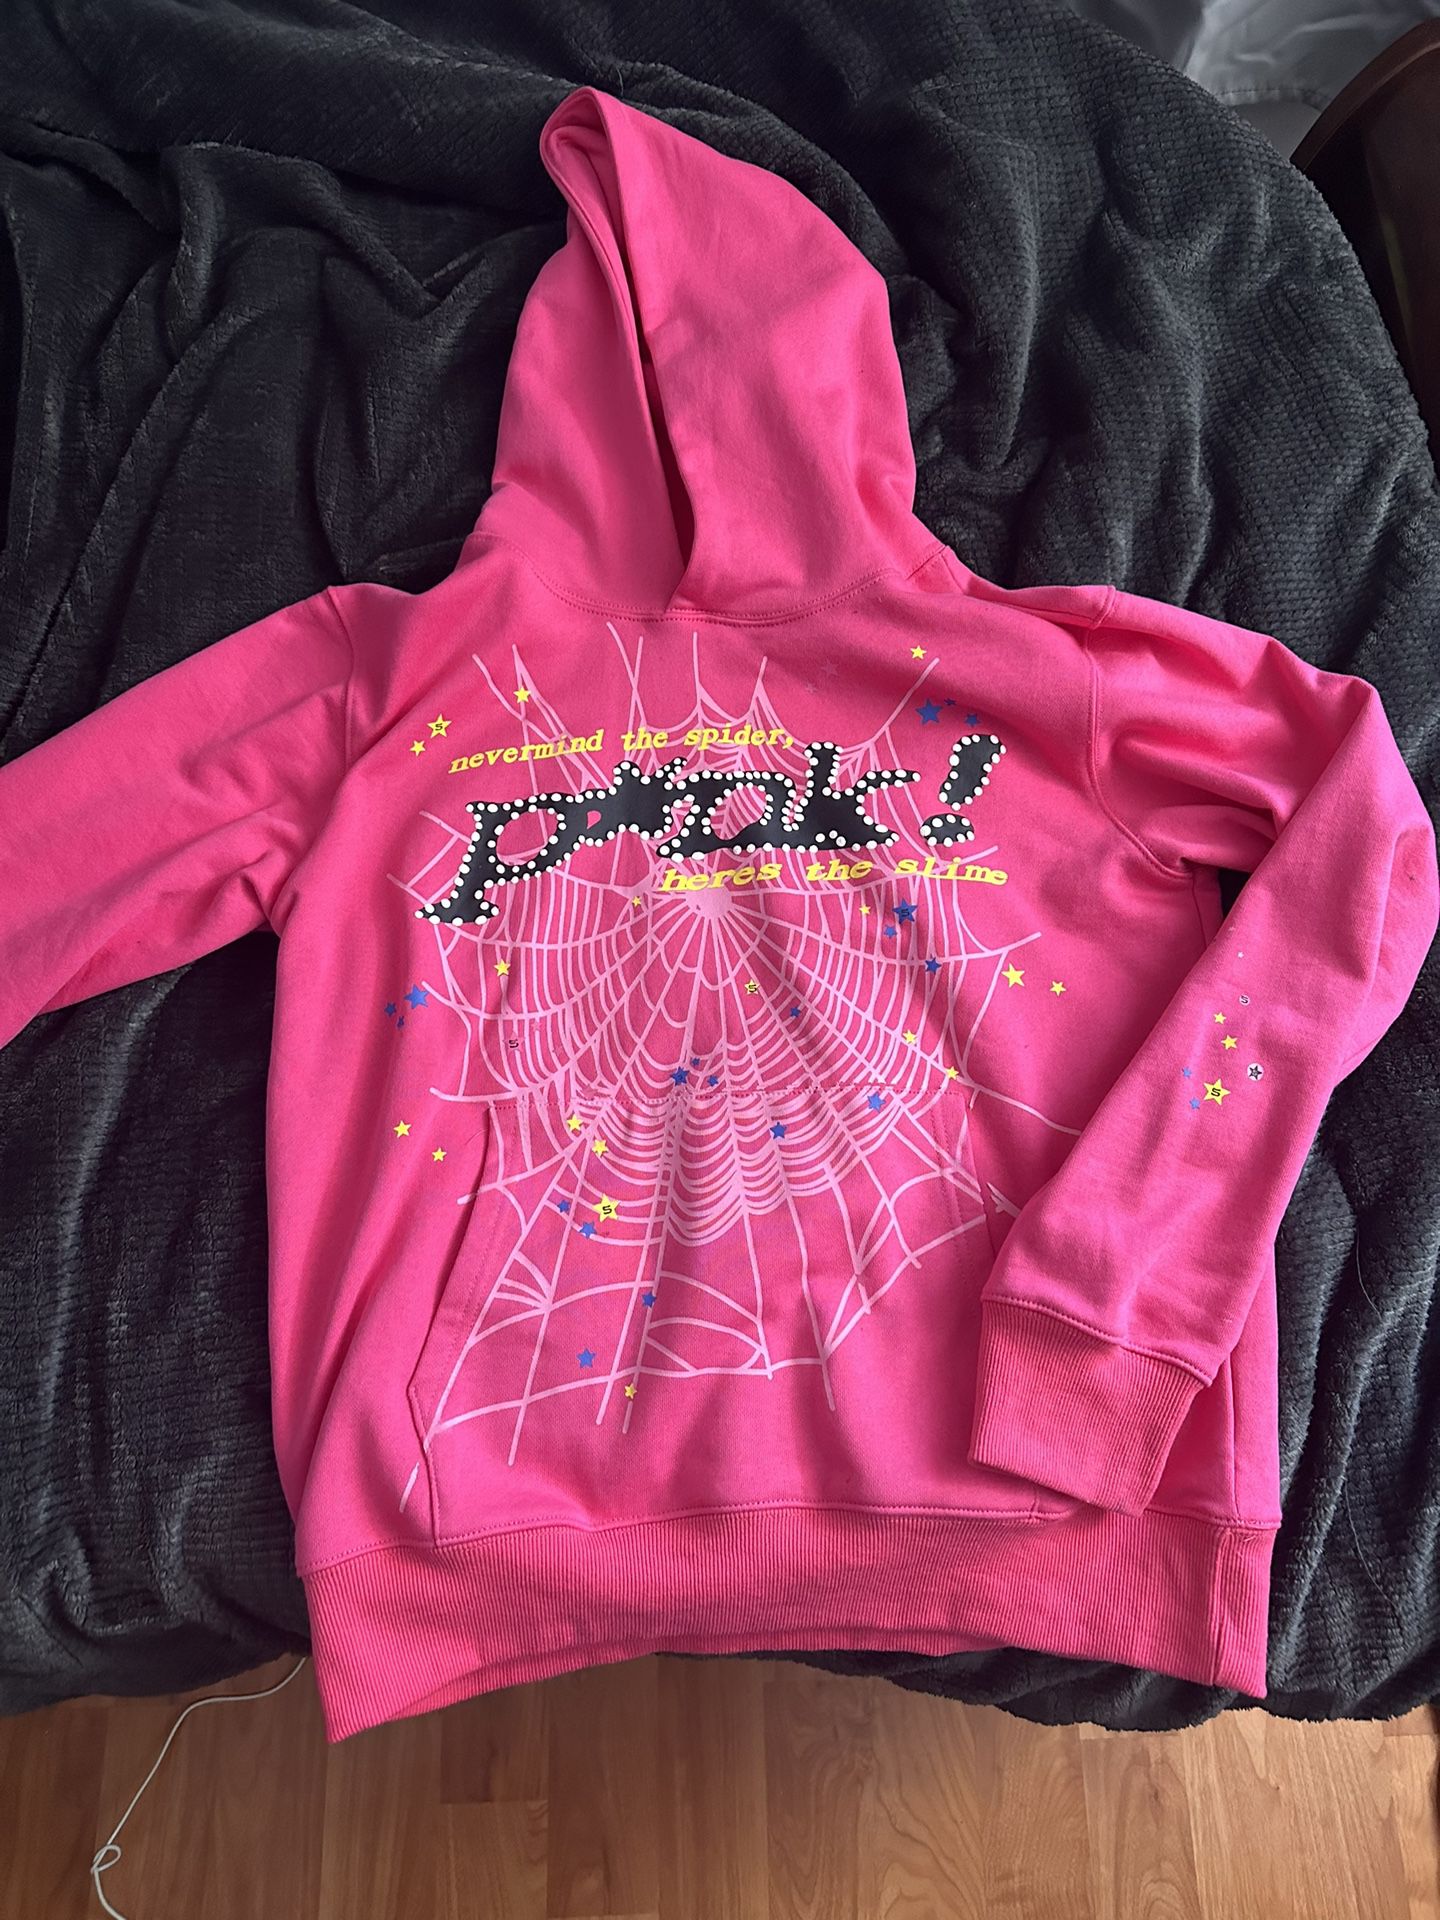 pink Sp5der hoodie size small